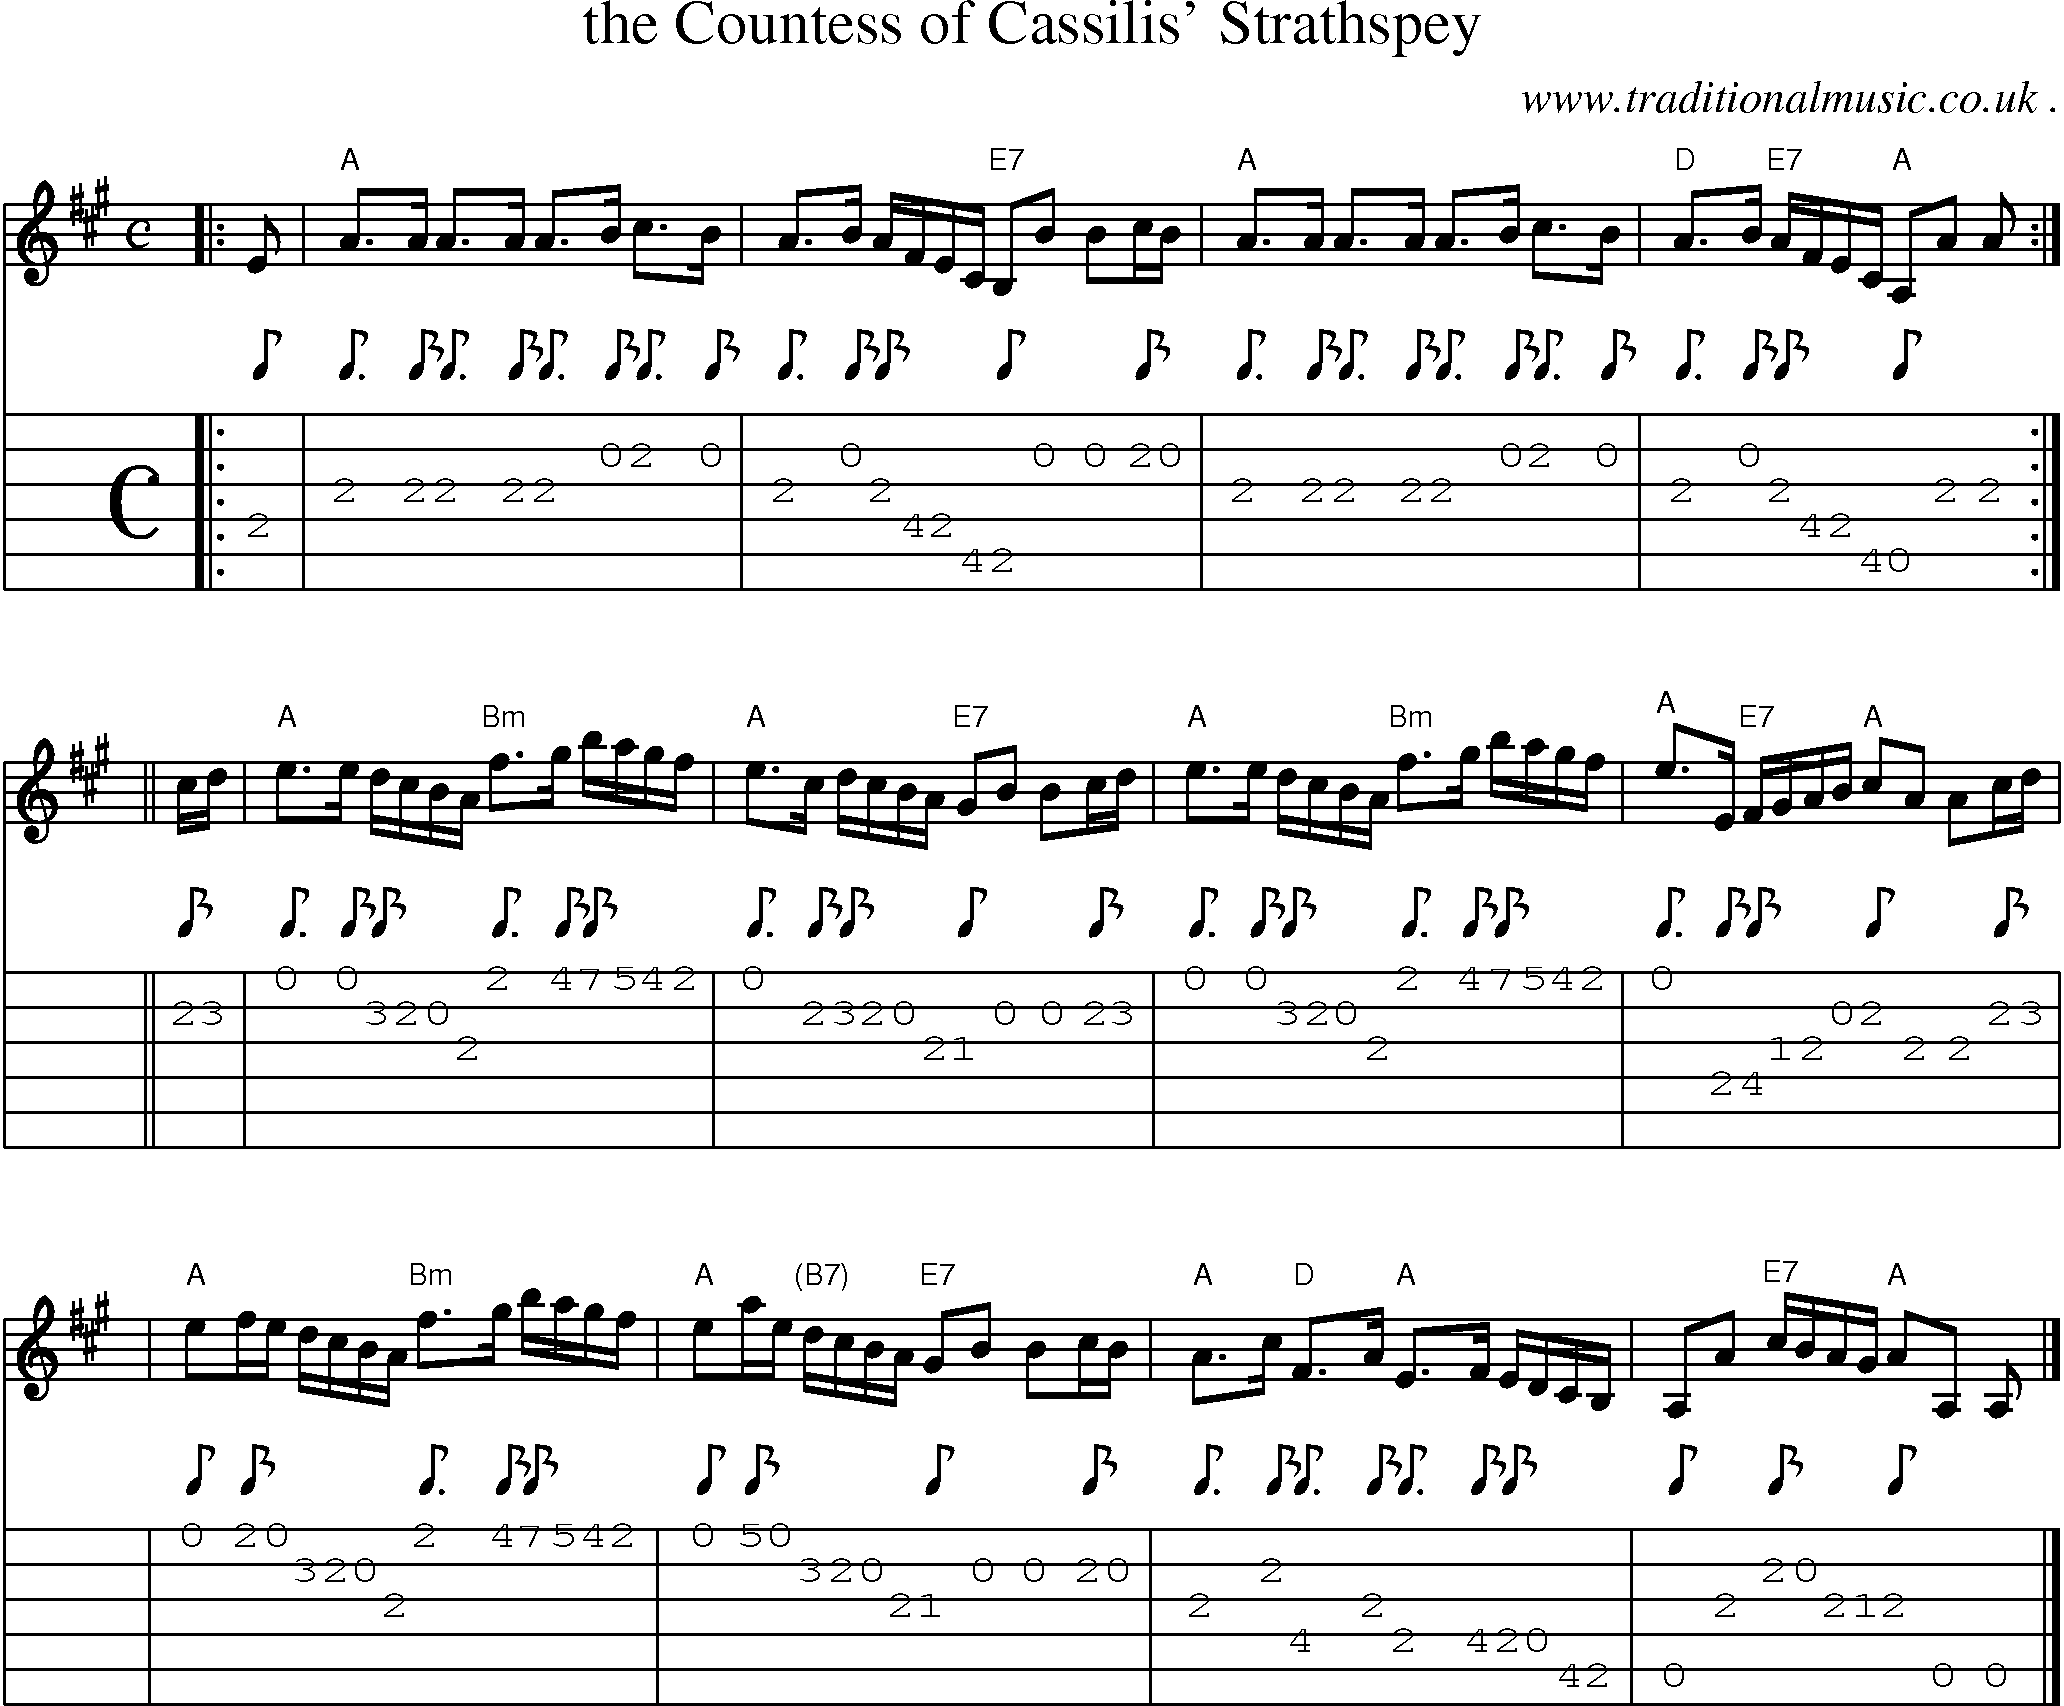 Sheet-music  score, Chords and Guitar Tabs for The Countess Of Cassilis Strathspey